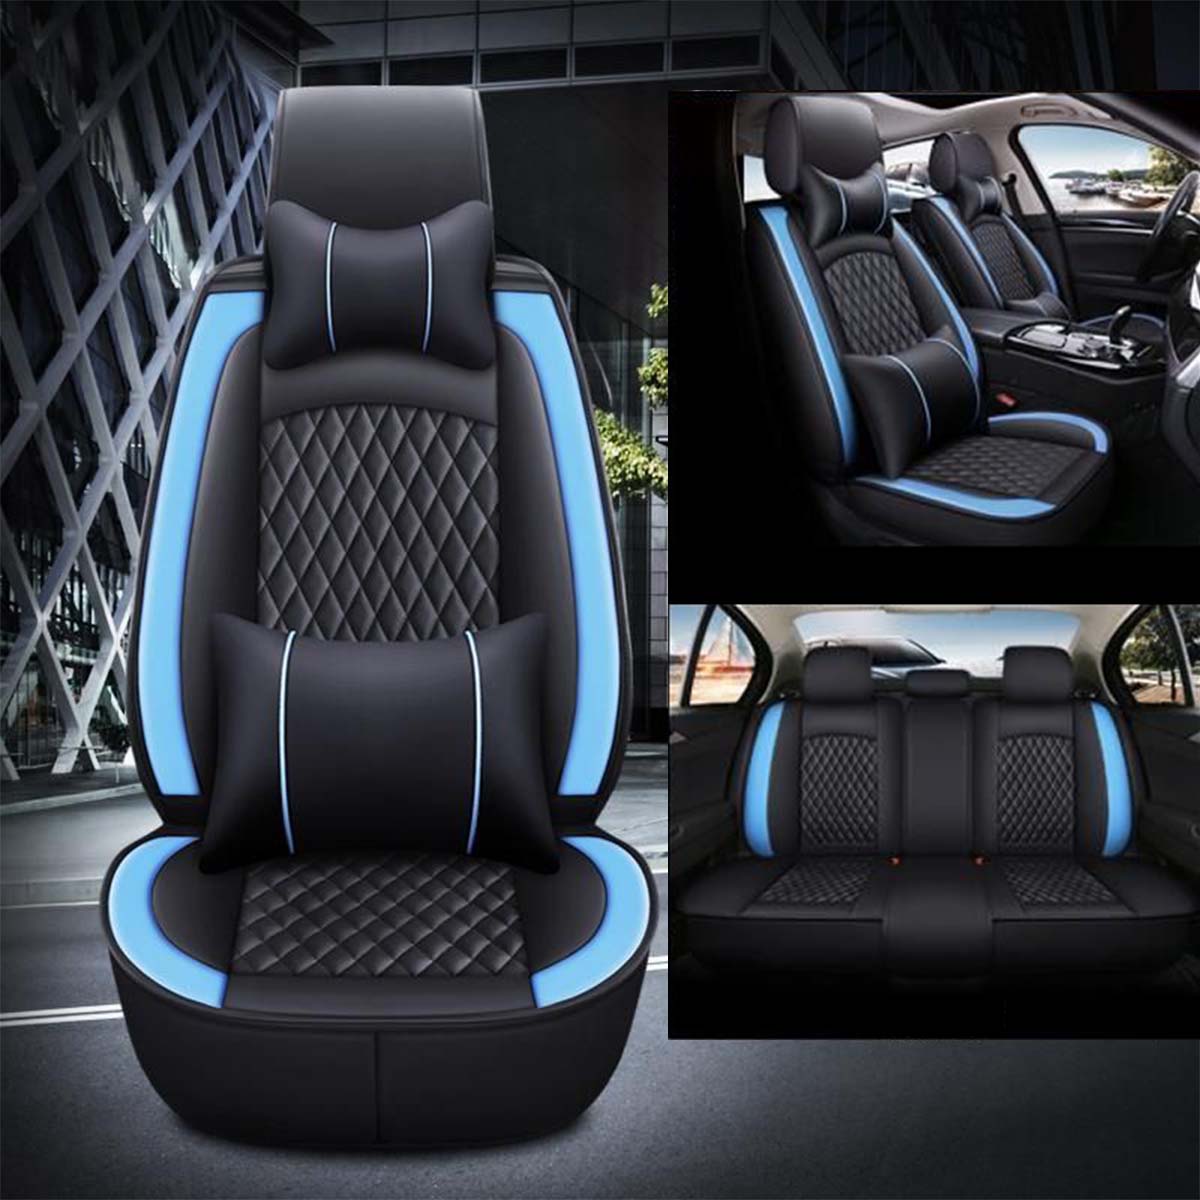 Lincoln Car Seat Covers Full Set: Complete Protection and Style for Your Vehicle